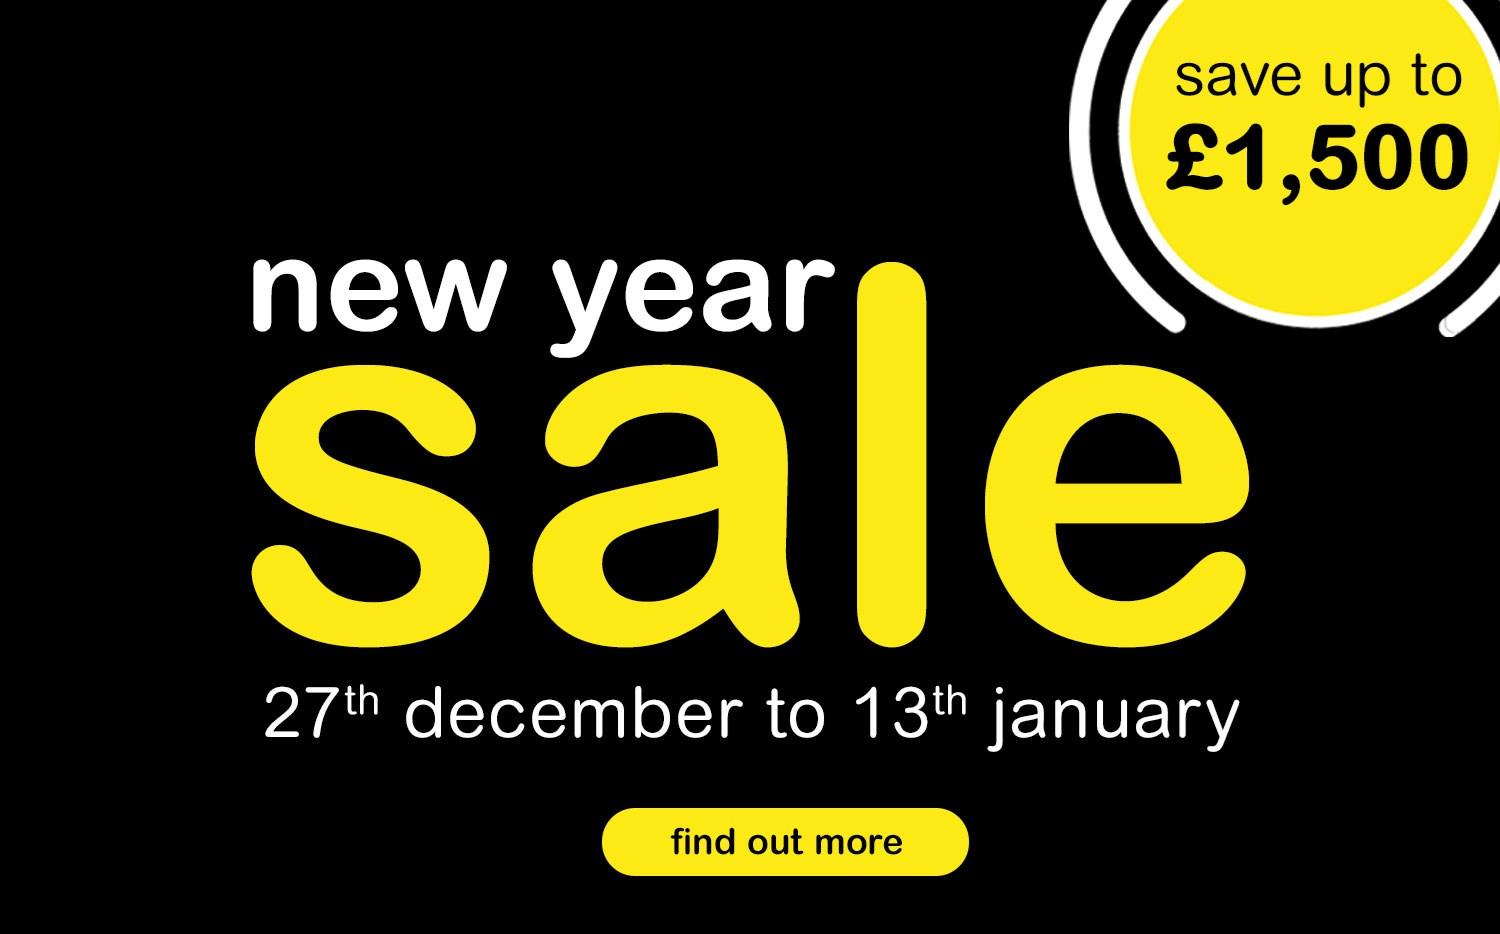 New Year Sale save up to £1,500